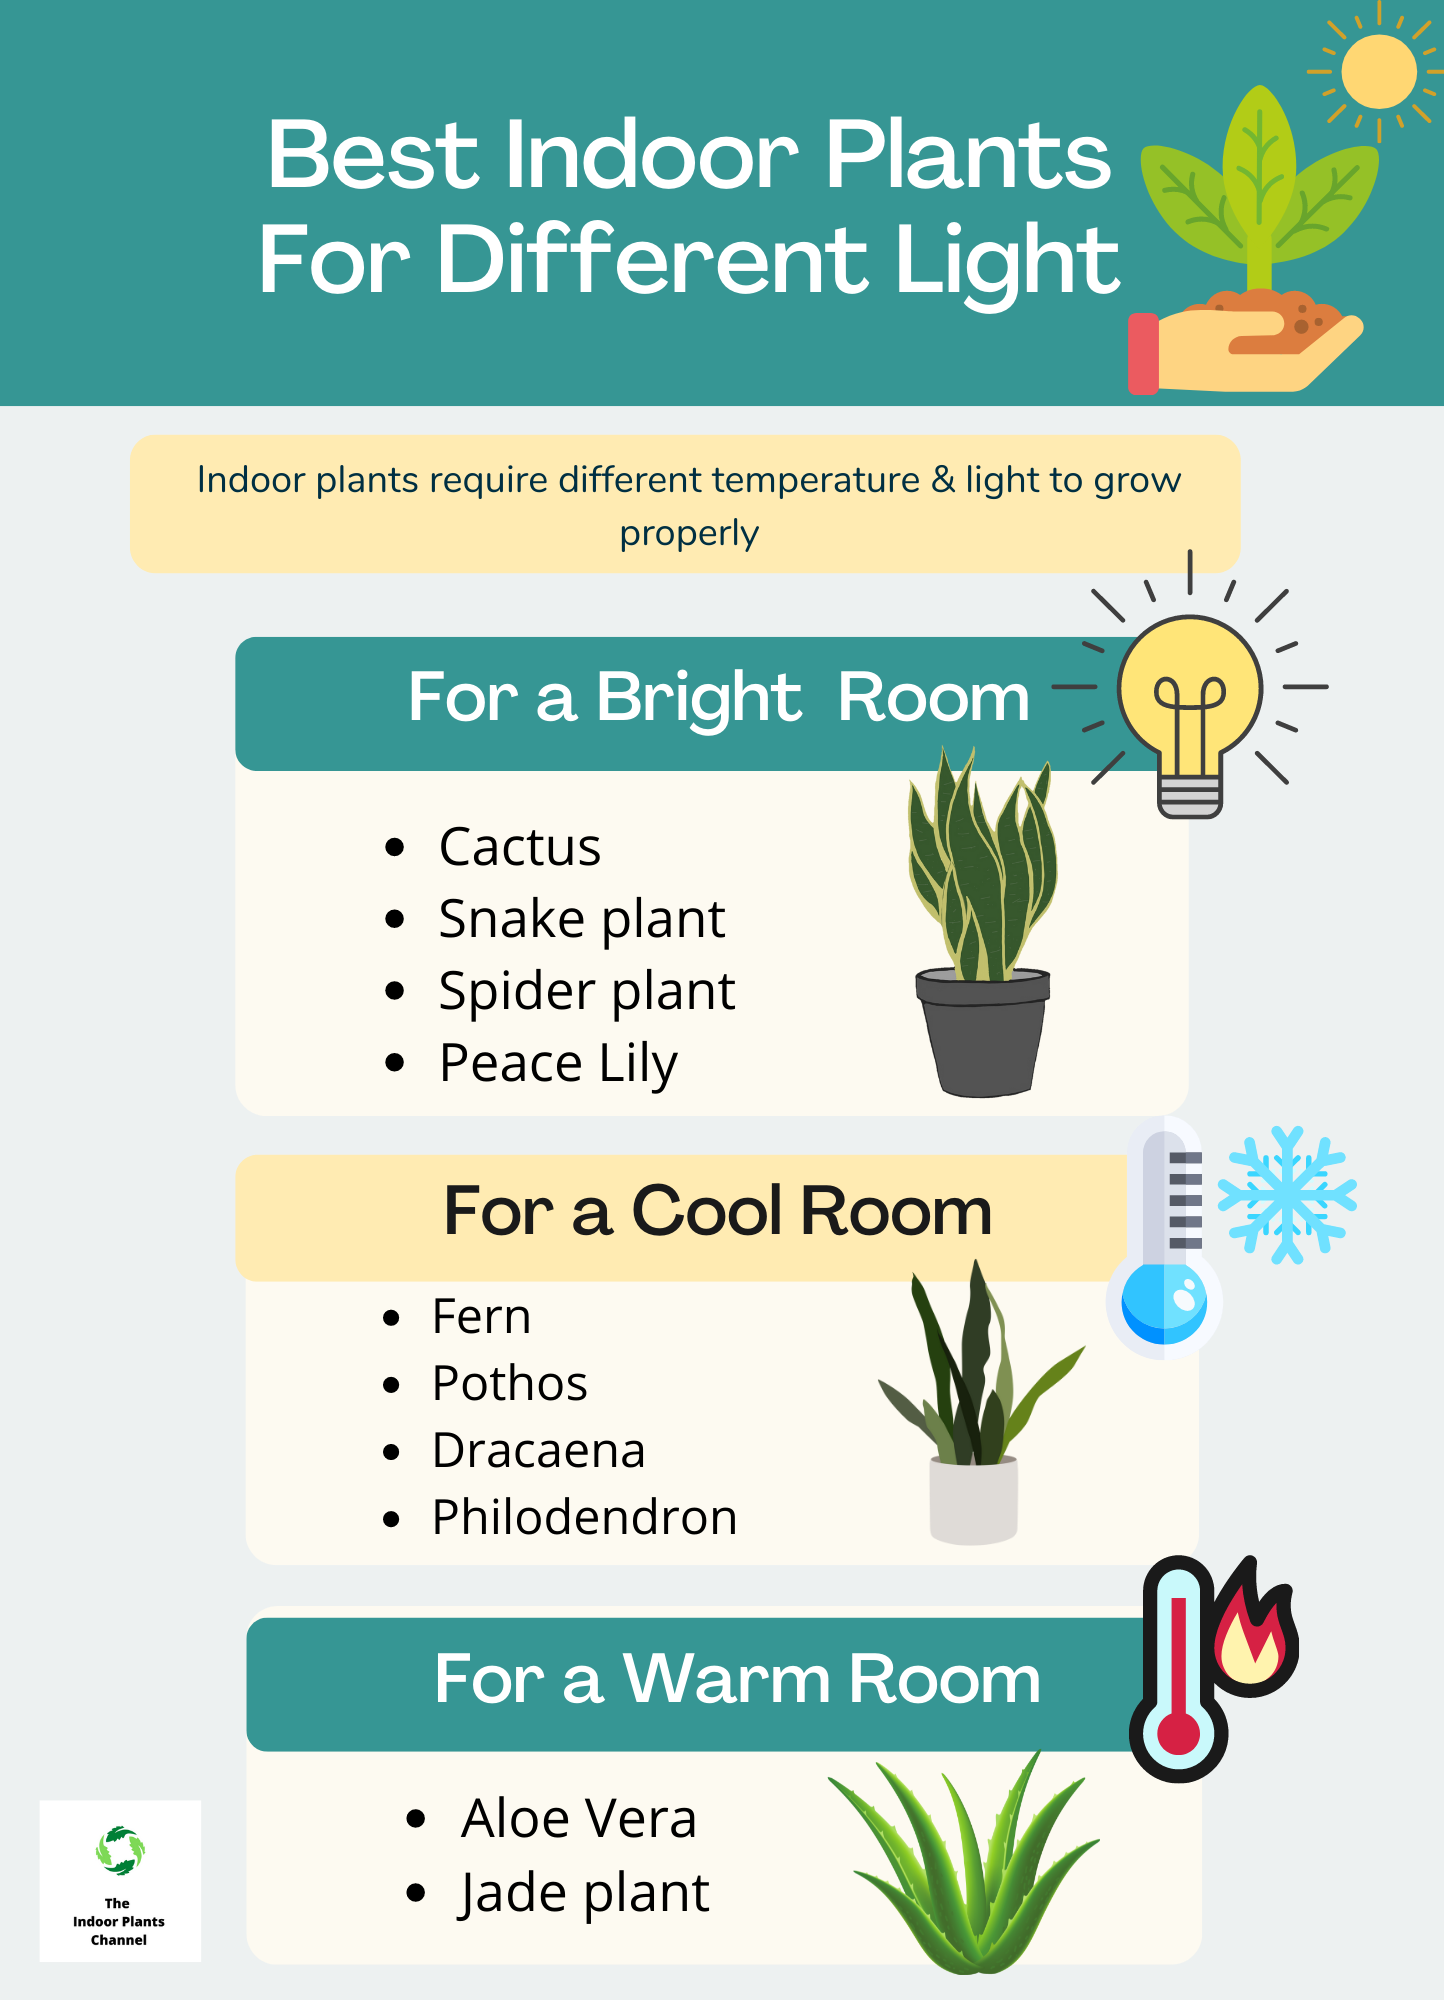 The Best Indoor Plants For Different Rooms